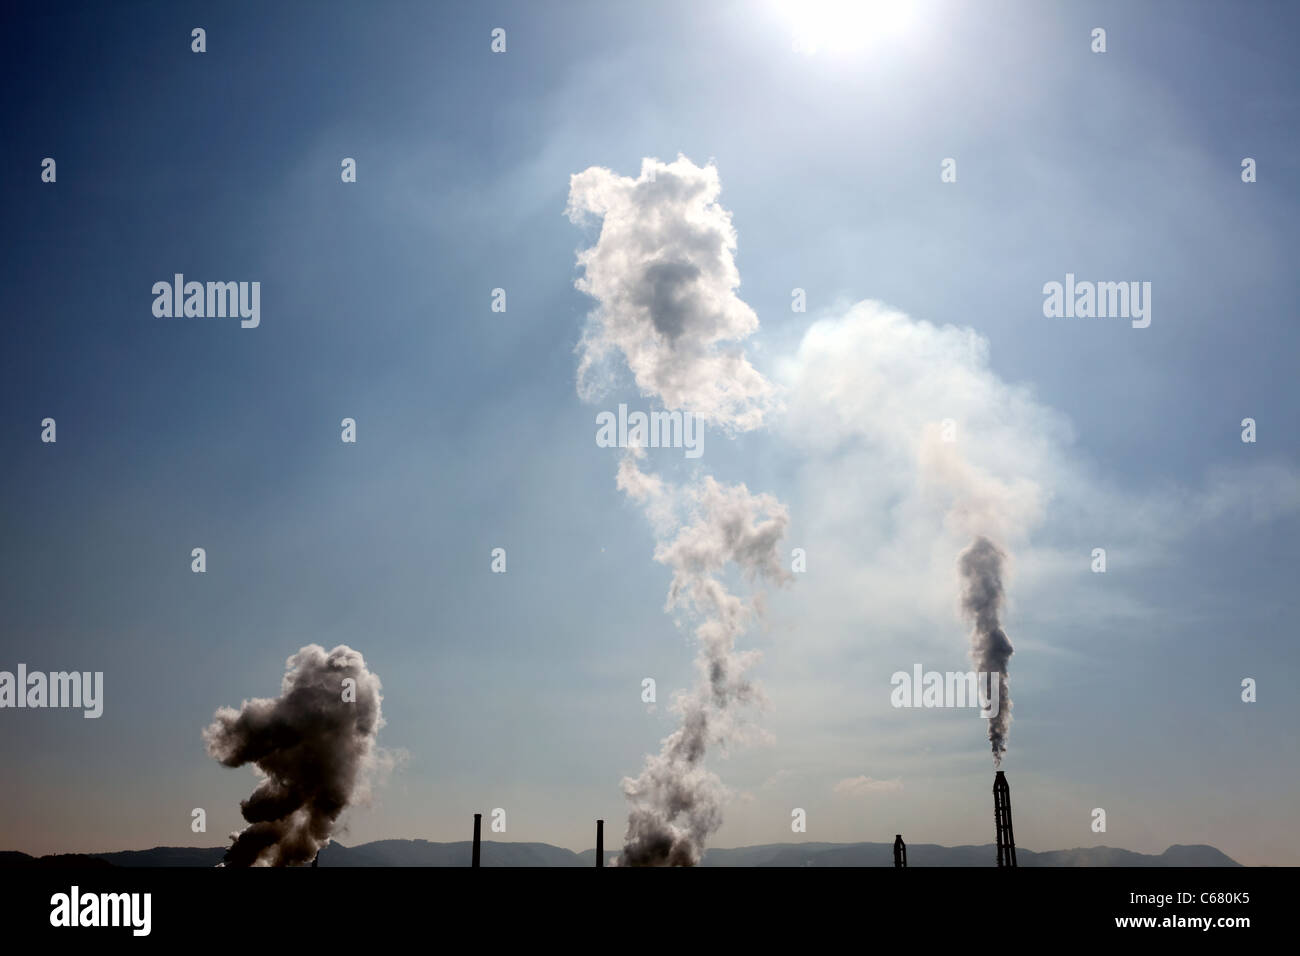 Industrial plant with smoke stacks, Industrial area Stock Photo